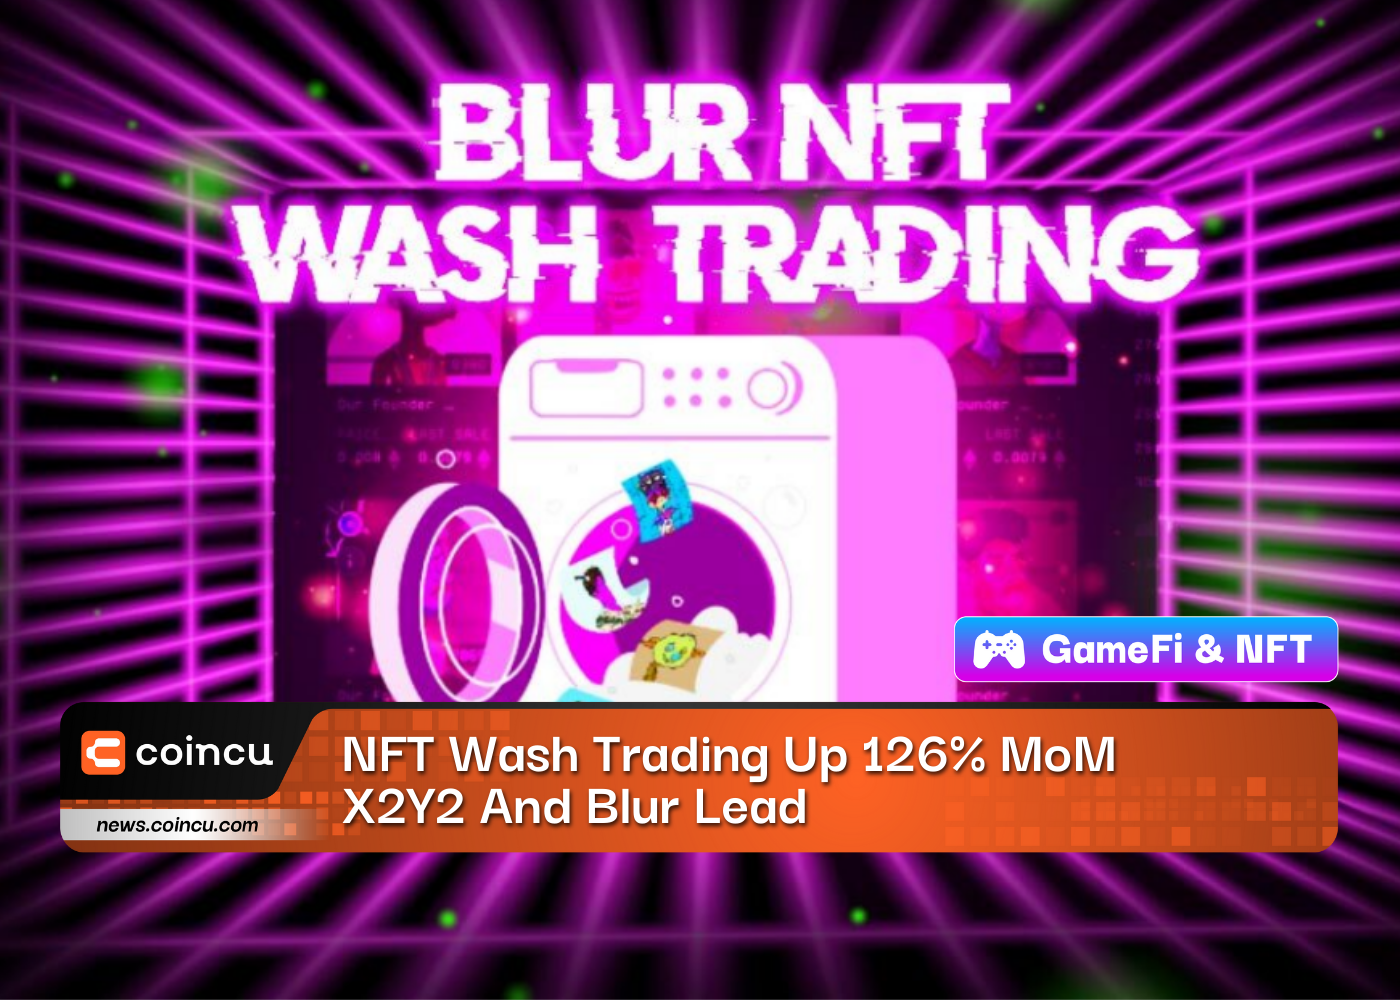 NFT Wash Trading Up 126% MoM, X2Y2 And Blur Lead